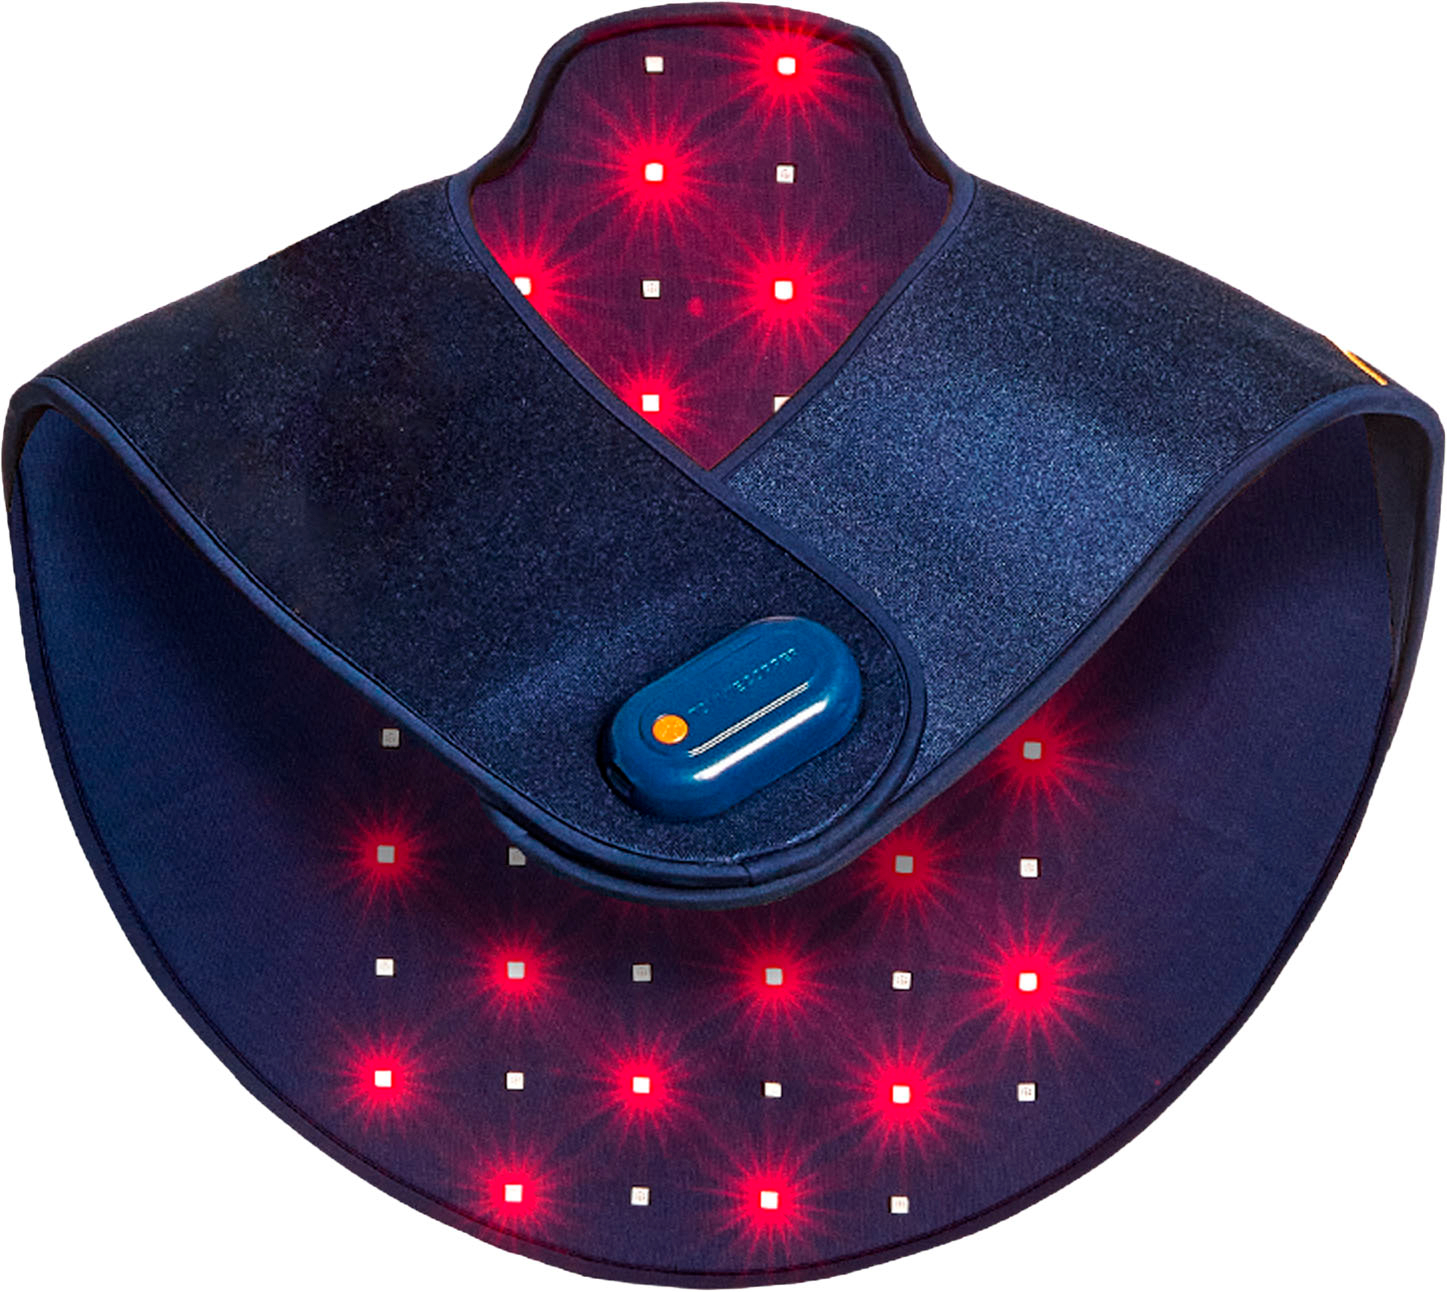 Infrared Neck Wrap - New Technology For Neck Pain Relief